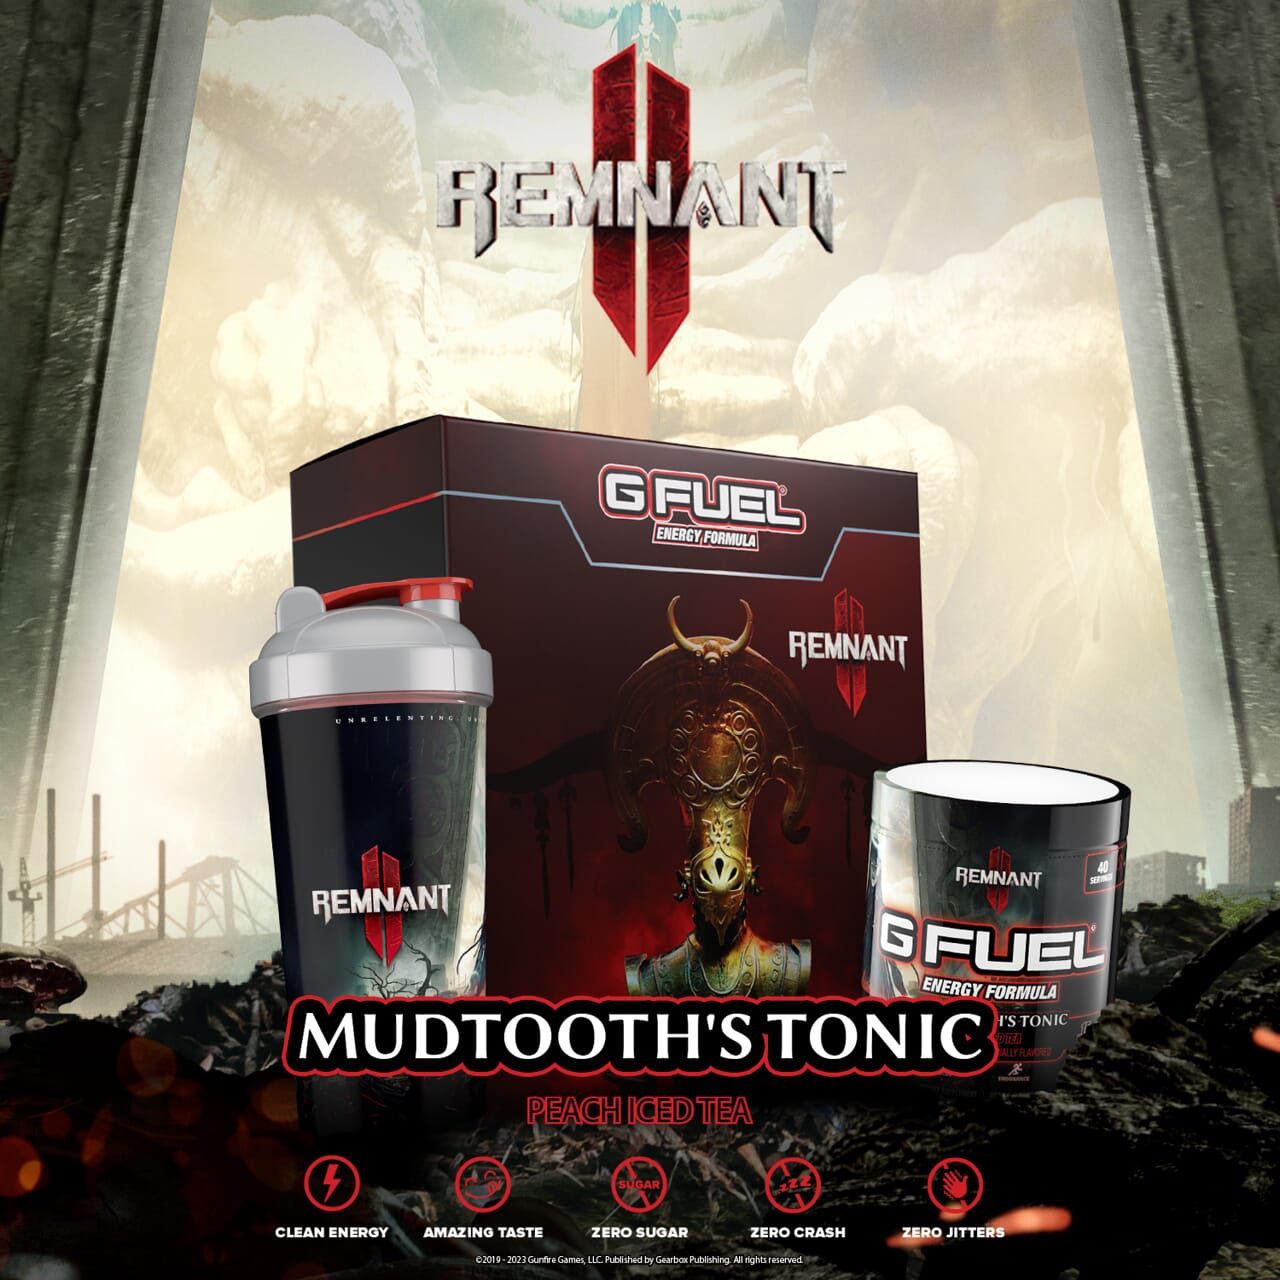 G FUEL Mudtooth's Tonic, Inspired by "Remnant II"